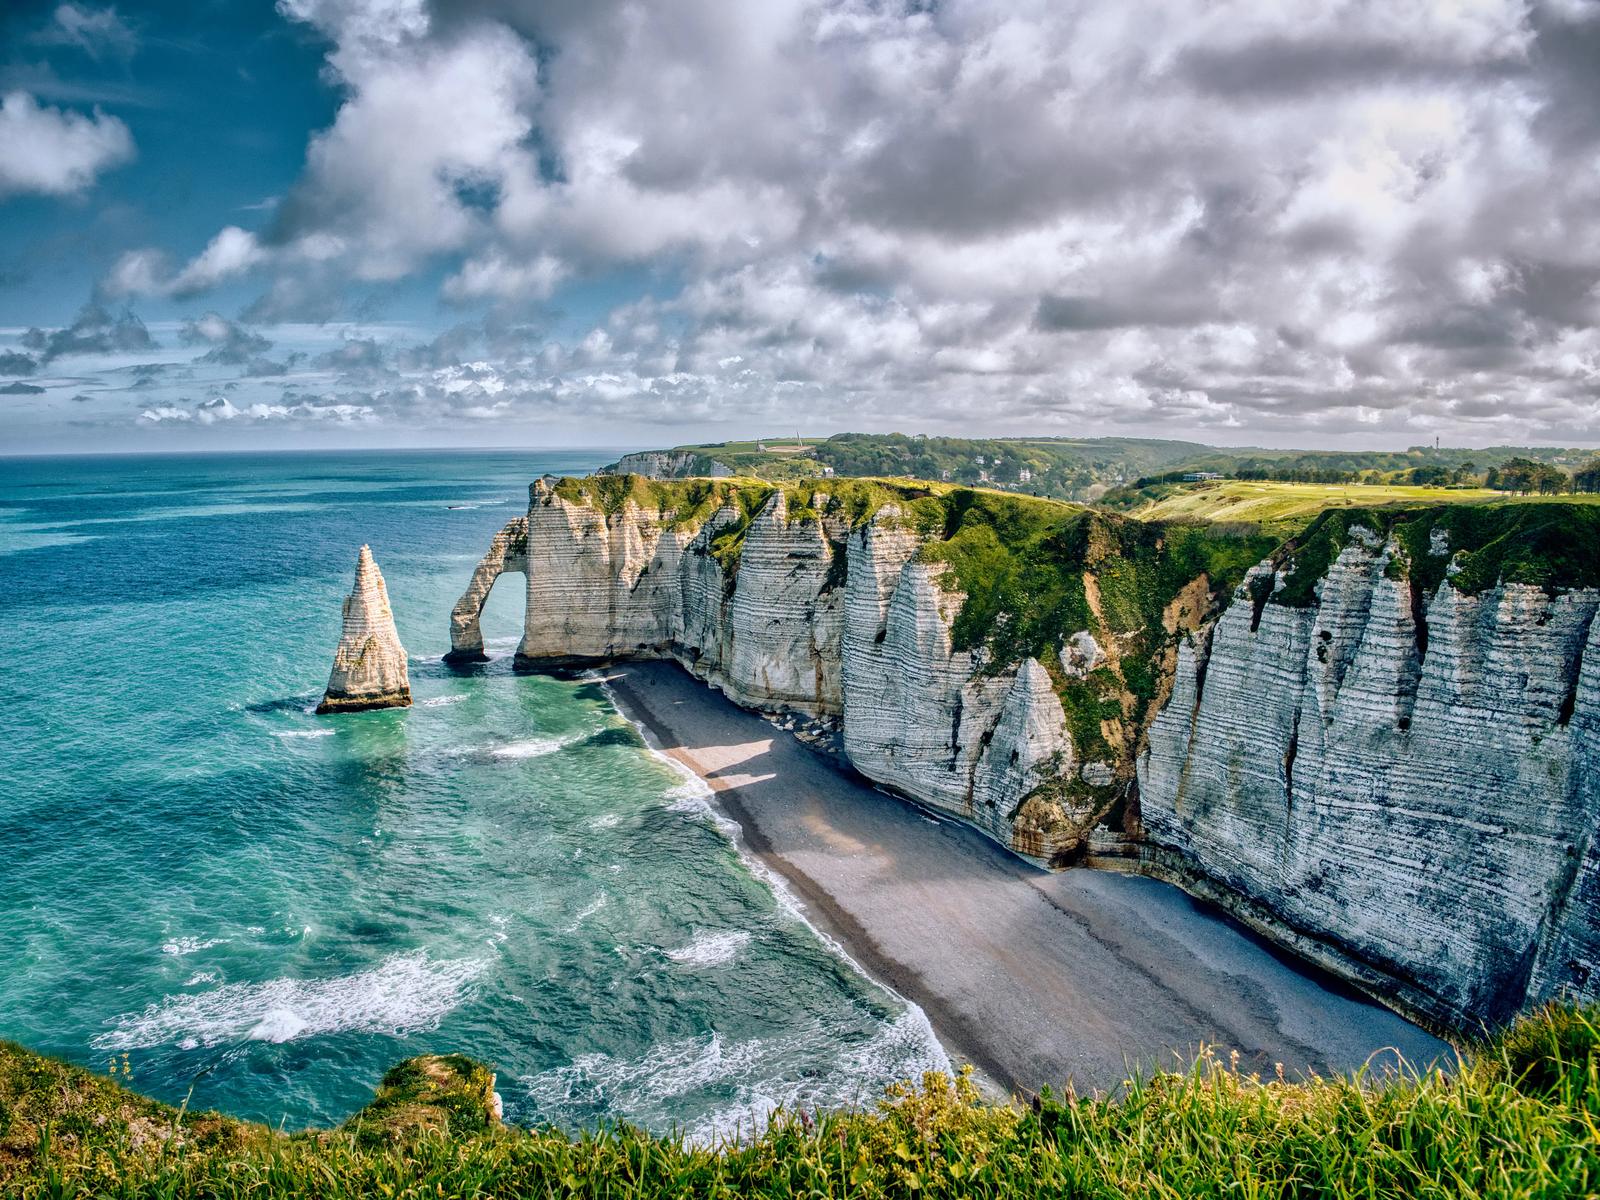 Can You Match These Natural Wonders to Their Locations? Cliffs of Etretat, Normandy, France